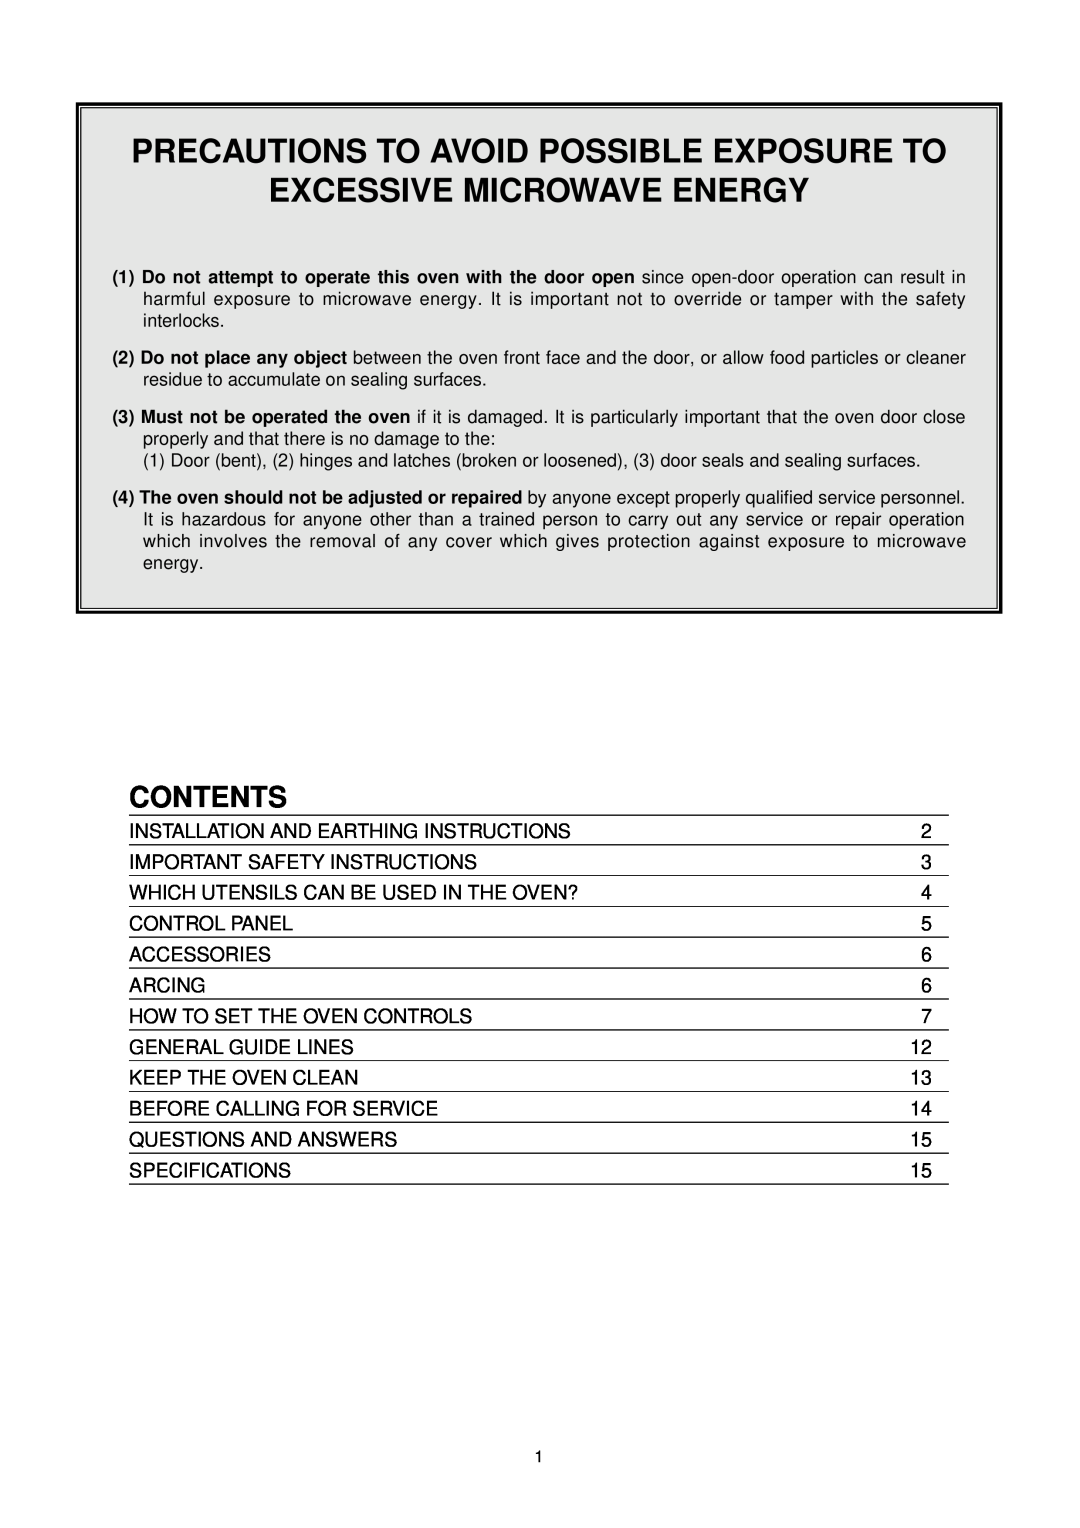 Daewoo KOC-873TSL manual Contents, Precautions To Avoid Possible Exposure To Excessive Microwave Energy 